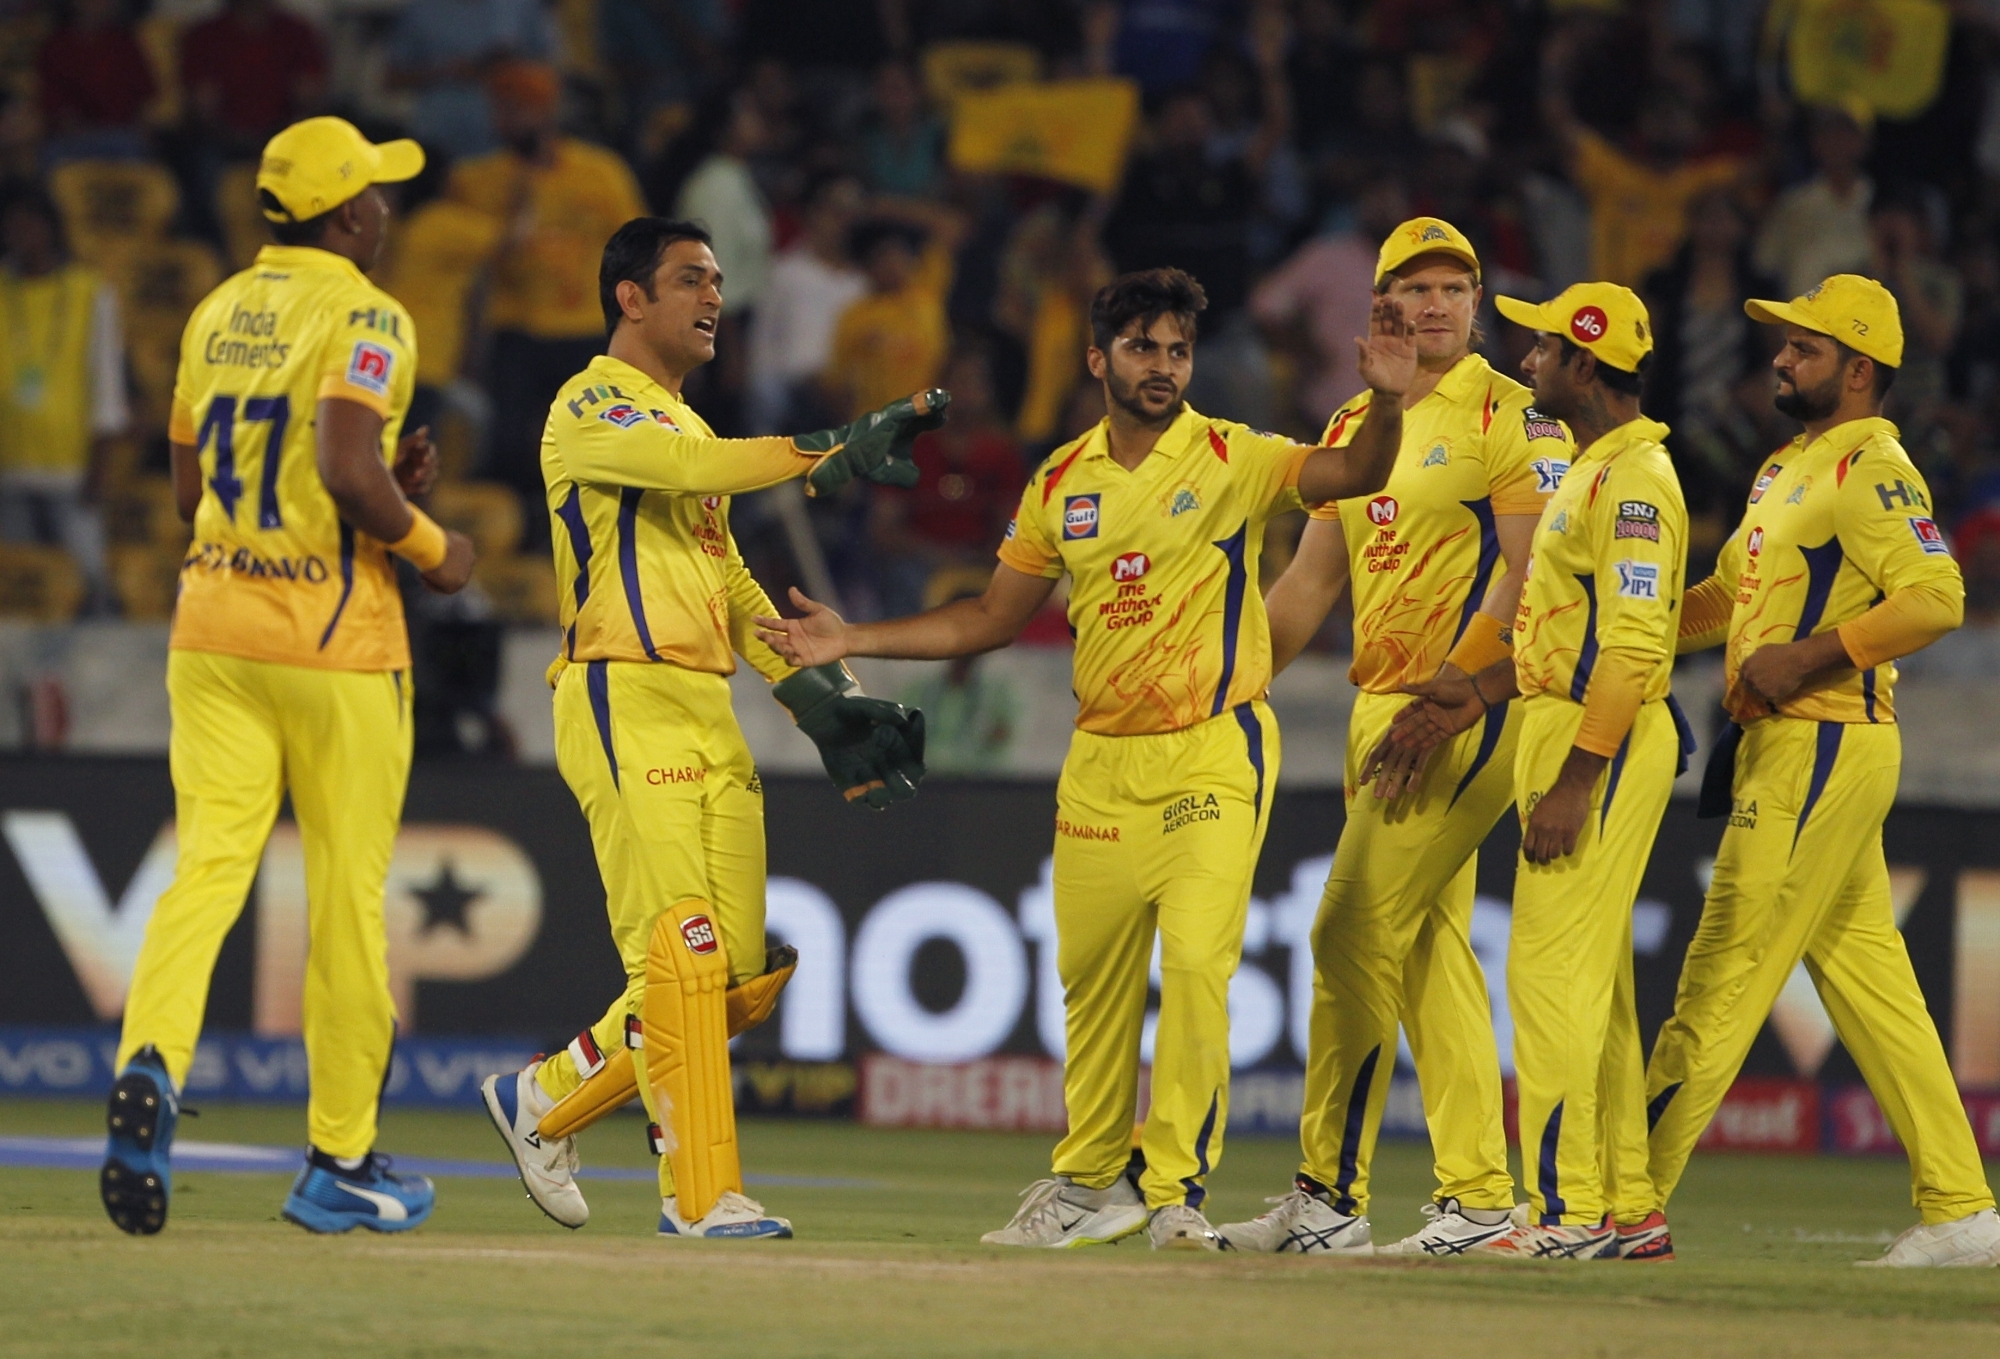 Dhoni's intelligence at the helm has shone through under pressure for CSK | IANS 